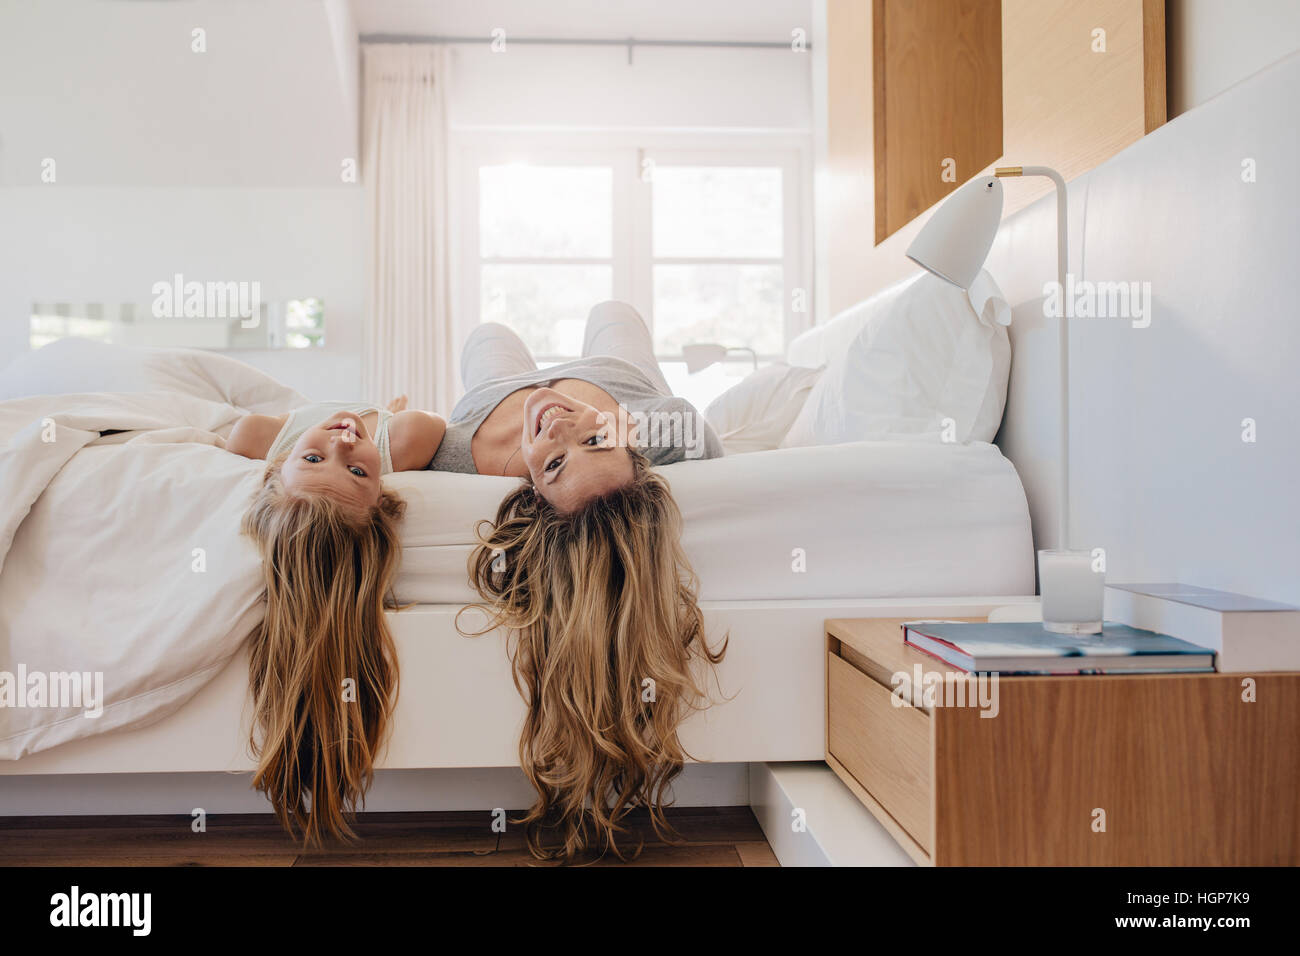 Young woman and a girl lying on bed. Mother and daughter in bedroom. Stock Photo